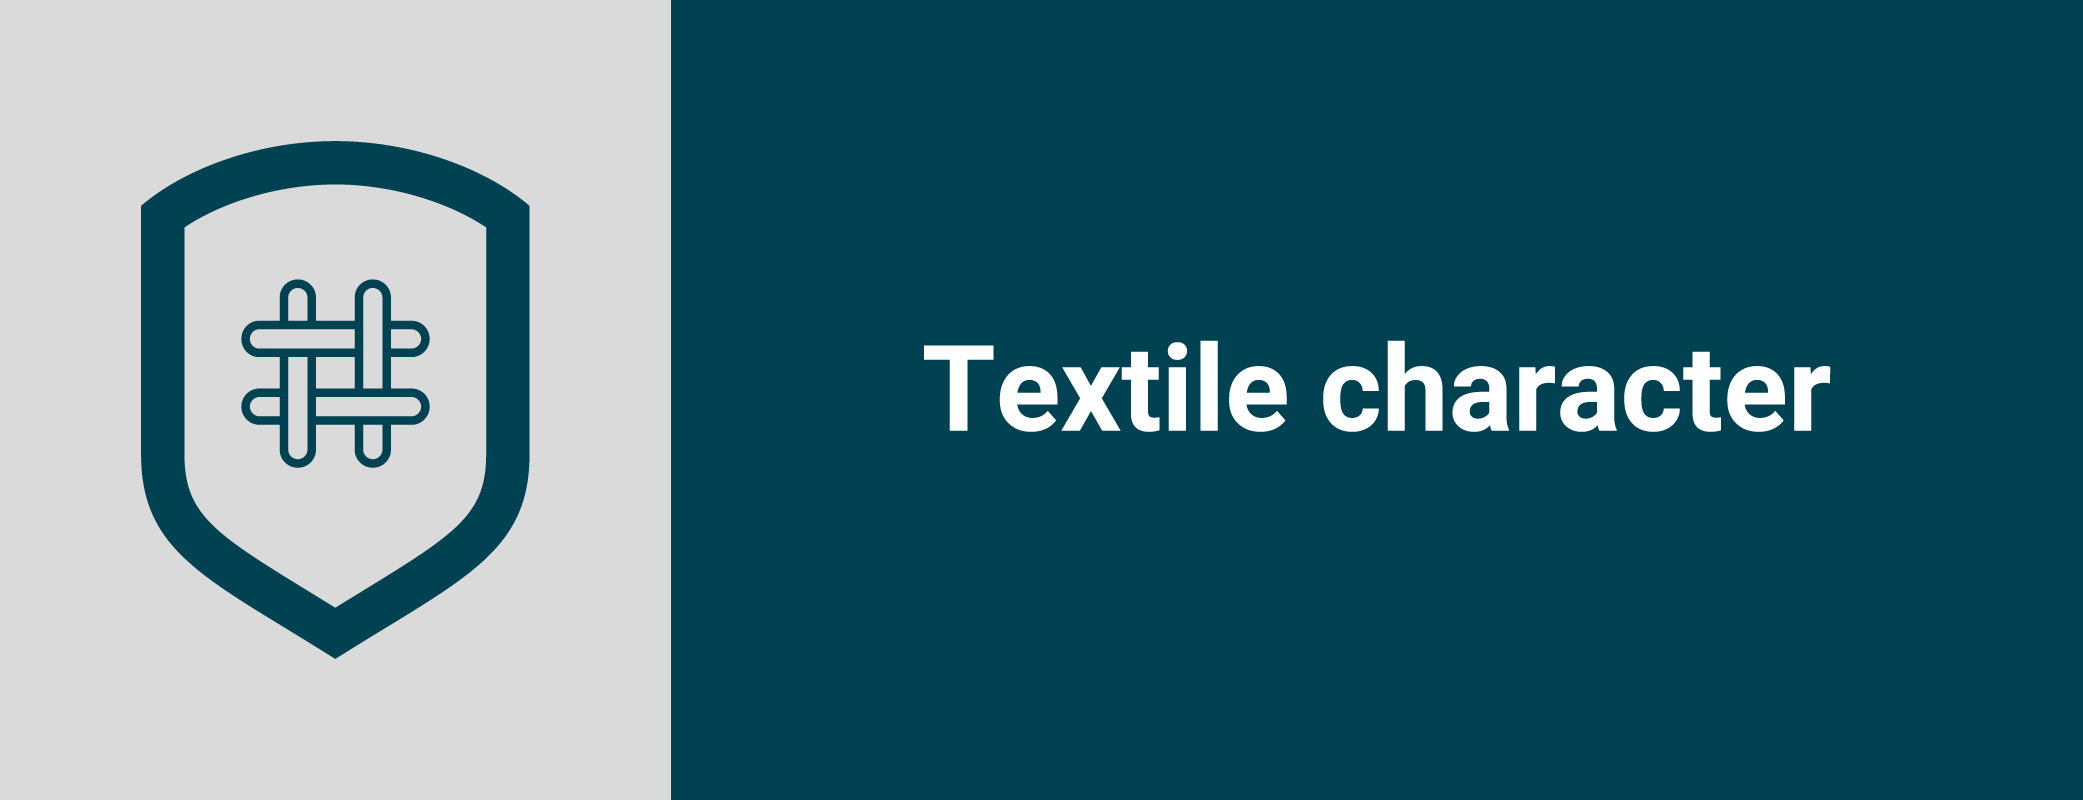 textile character